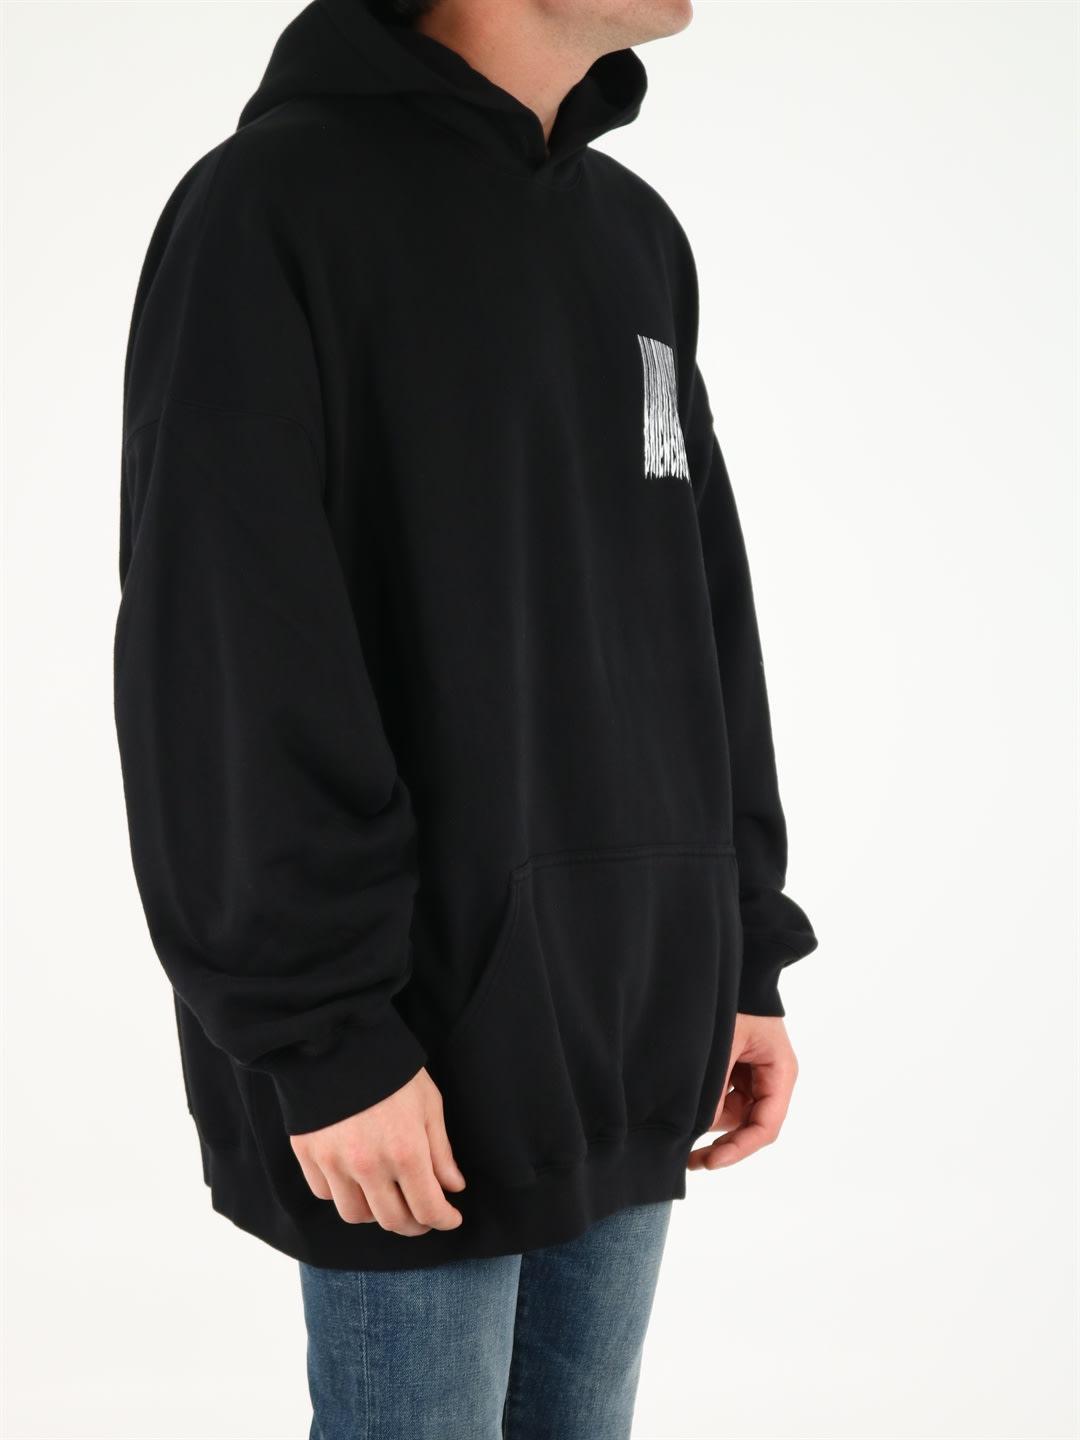 Balenciaga Cotton Oversized Barcode Hoodie in Black for Men - Lyst